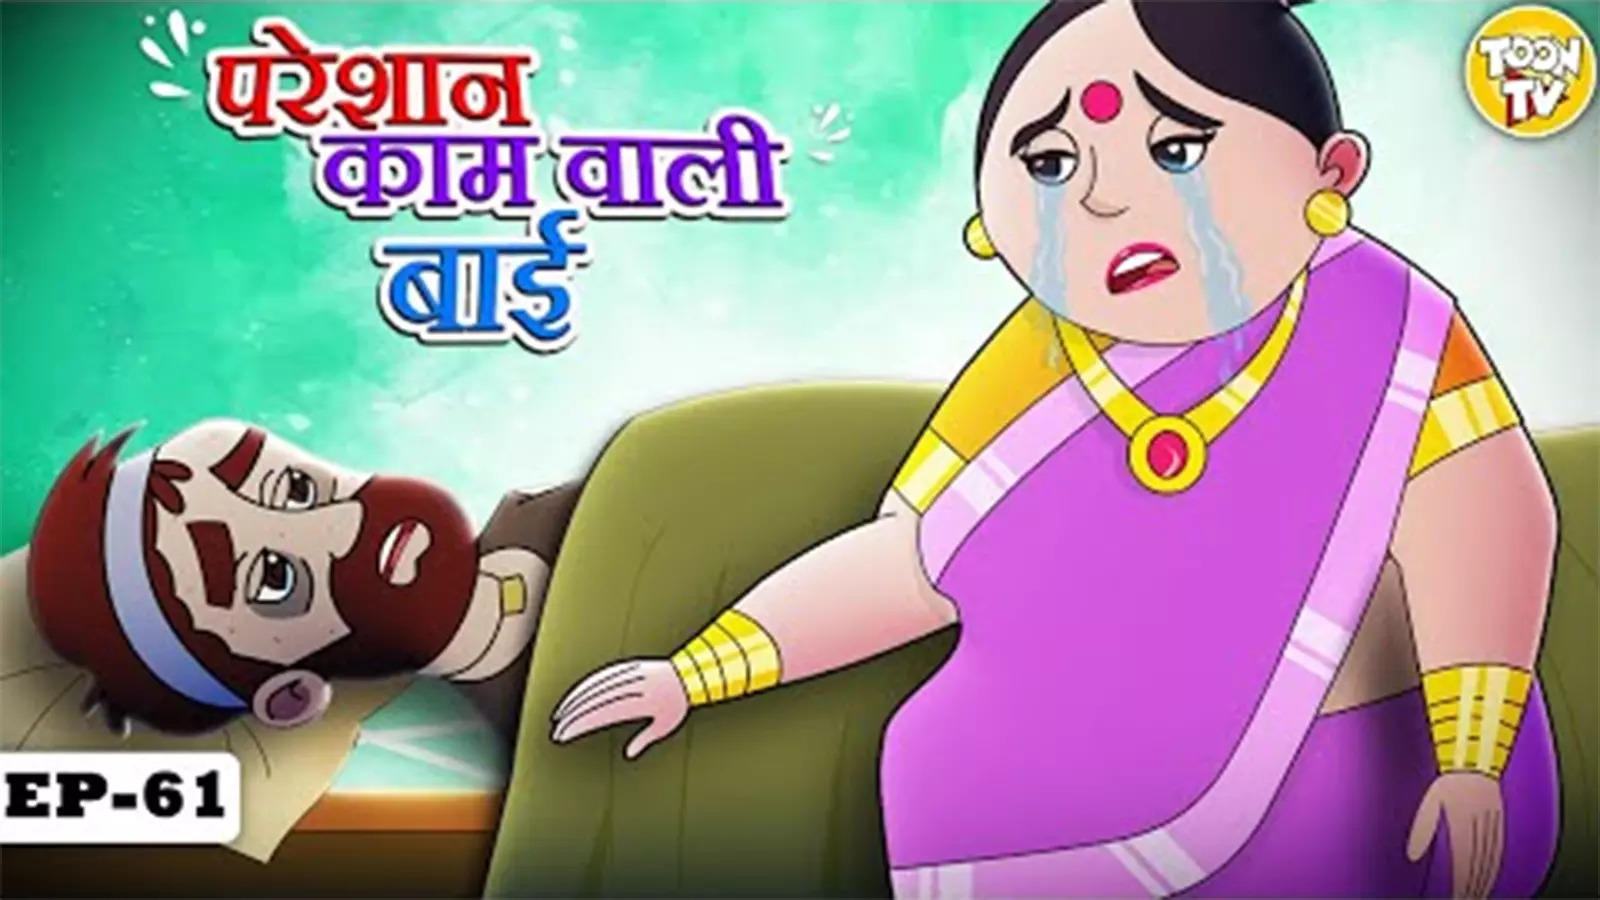 Watch Latest Children Hindi Story 'Pareshaan Kaamwali Bai' For Kids - Check  Out Kids Nursery Rhymes And Baby Songs In Hindi | Entertainment - Times of  India Videos